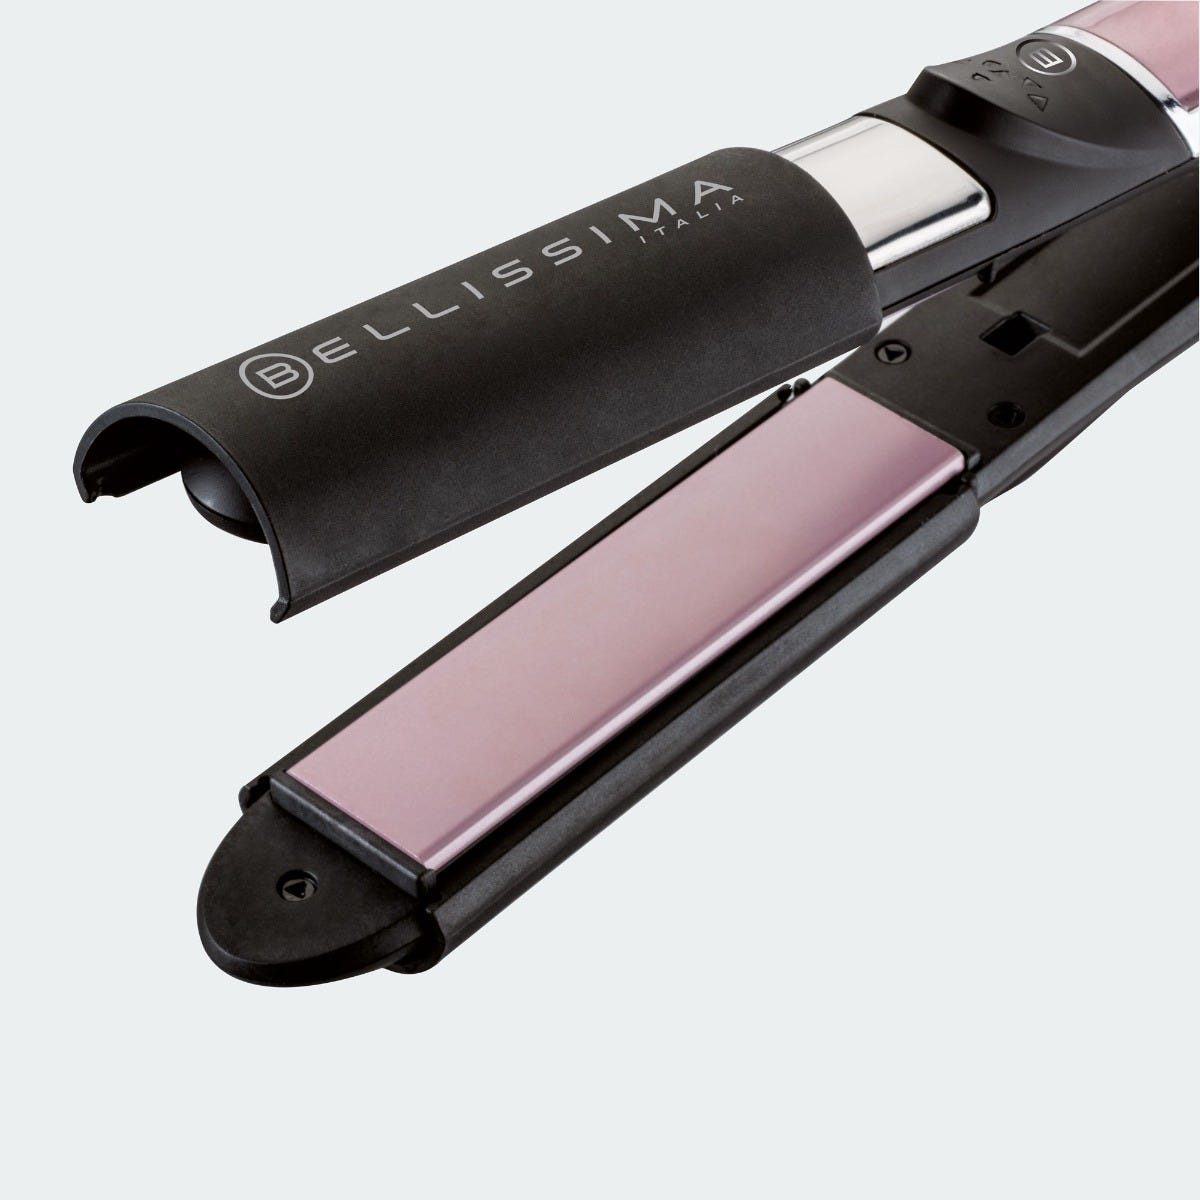 Styler with heated outer plates for different looks B27 100